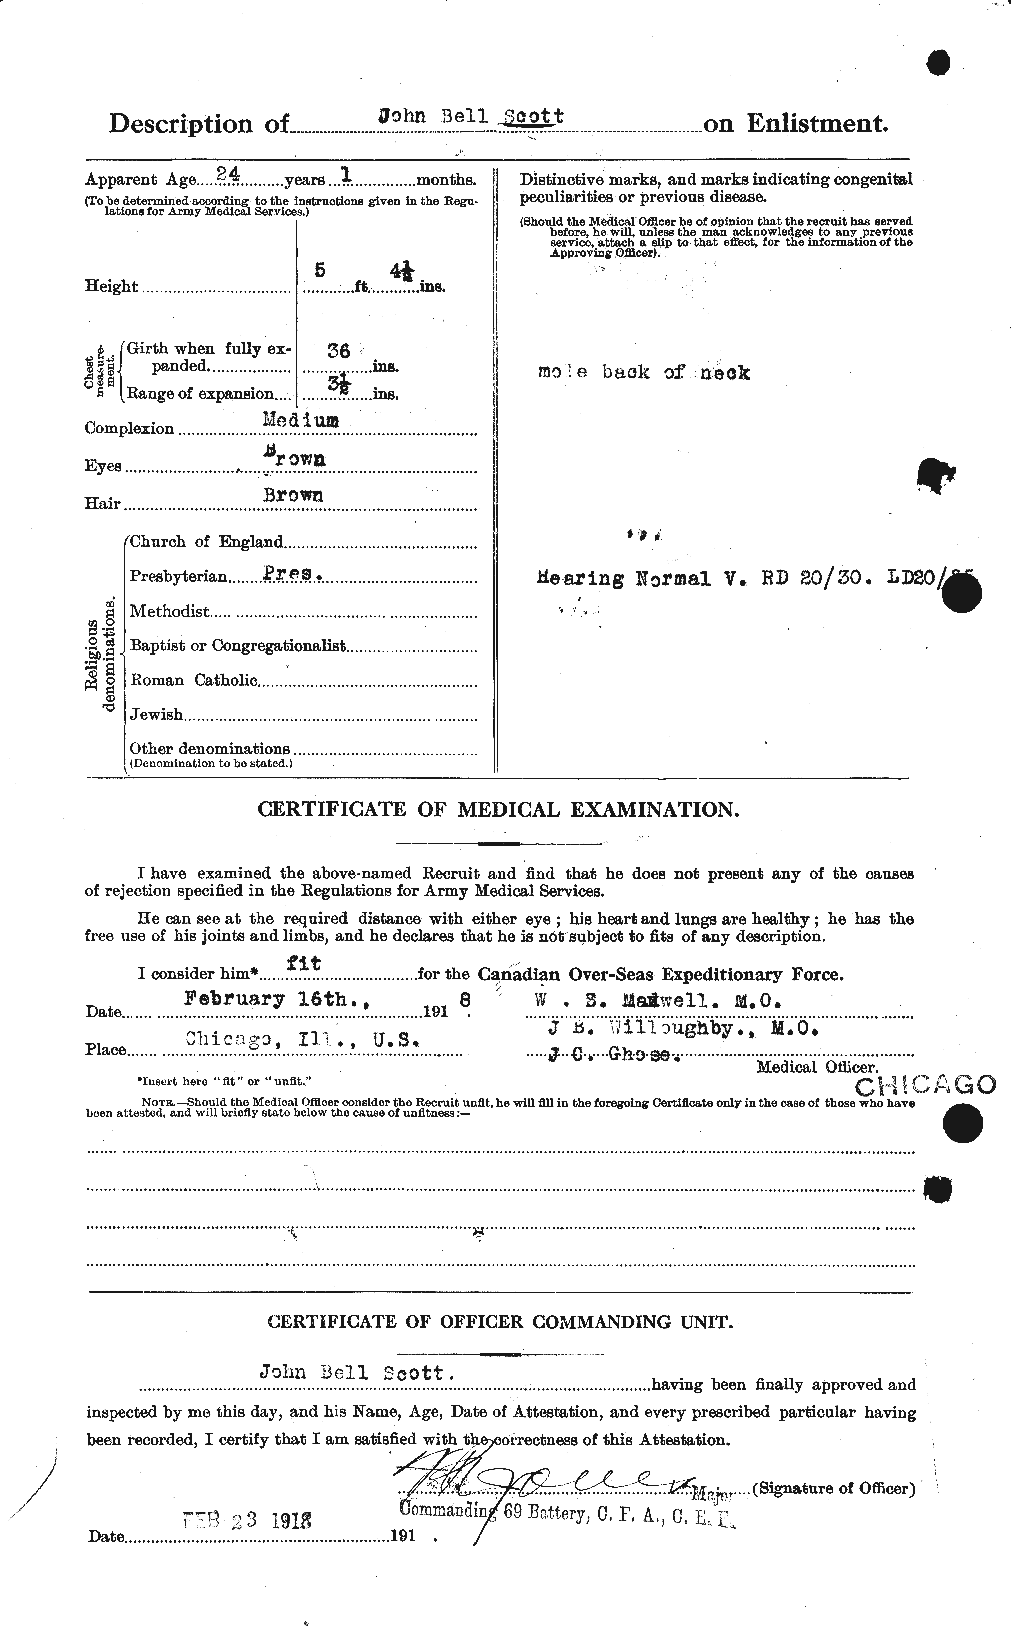 Personnel Records of the First World War - CEF 084657b